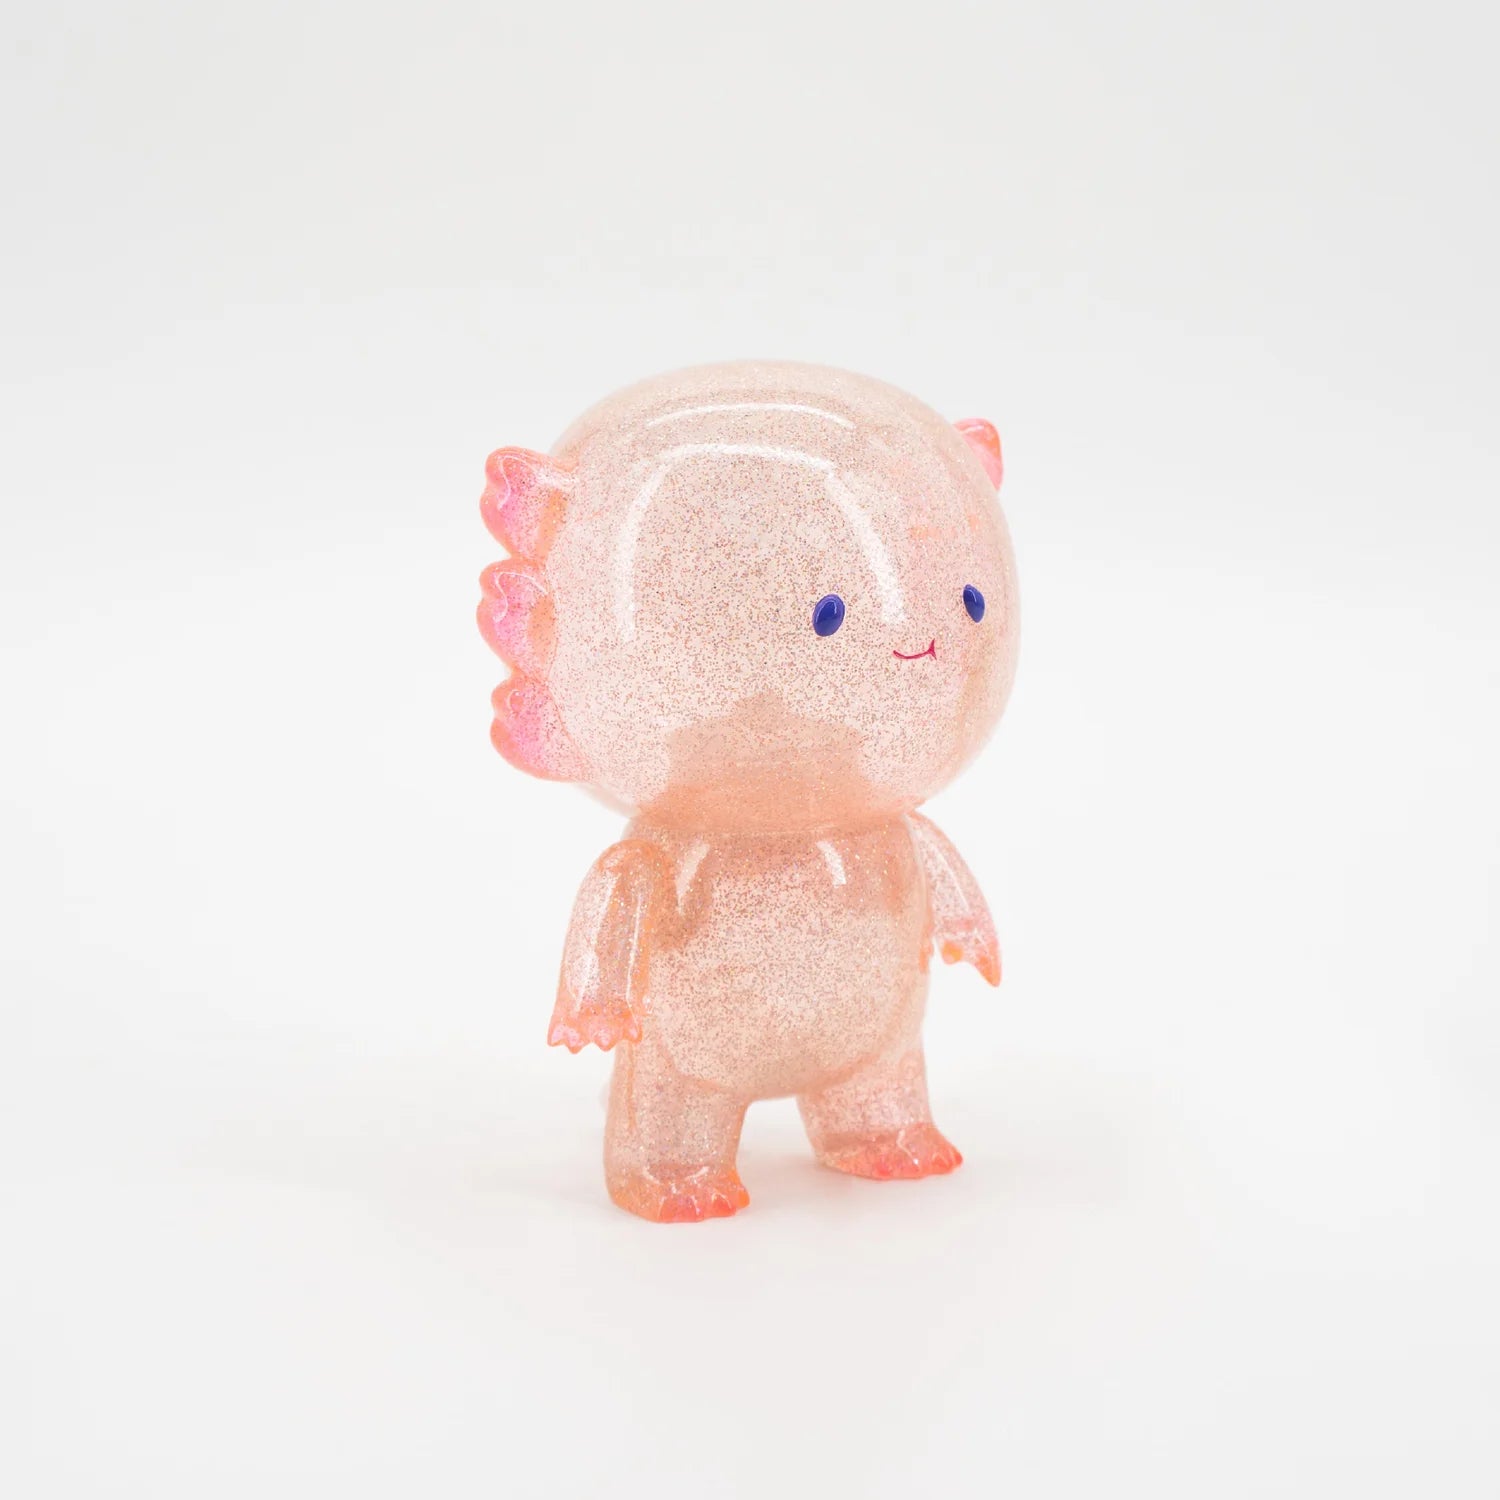 AXEL THE CHUBBY MONSTER (PINK GLITTER VARIANT)